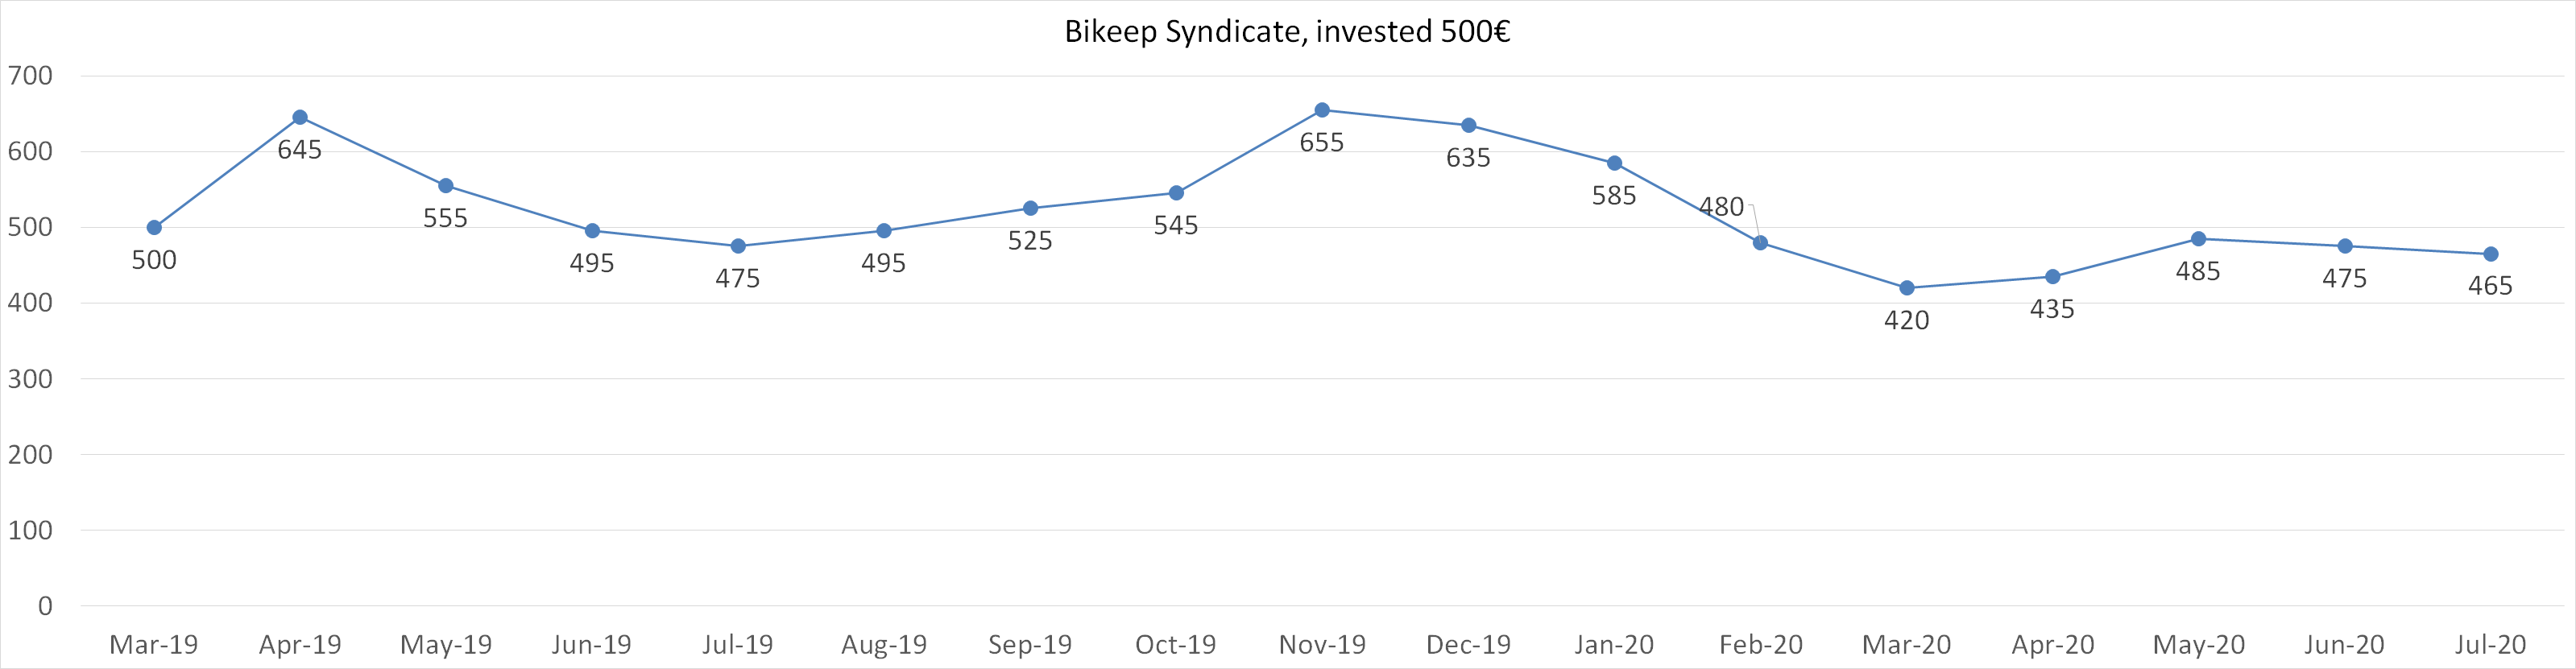 Bikeep syndicate, invested 500 july 2020